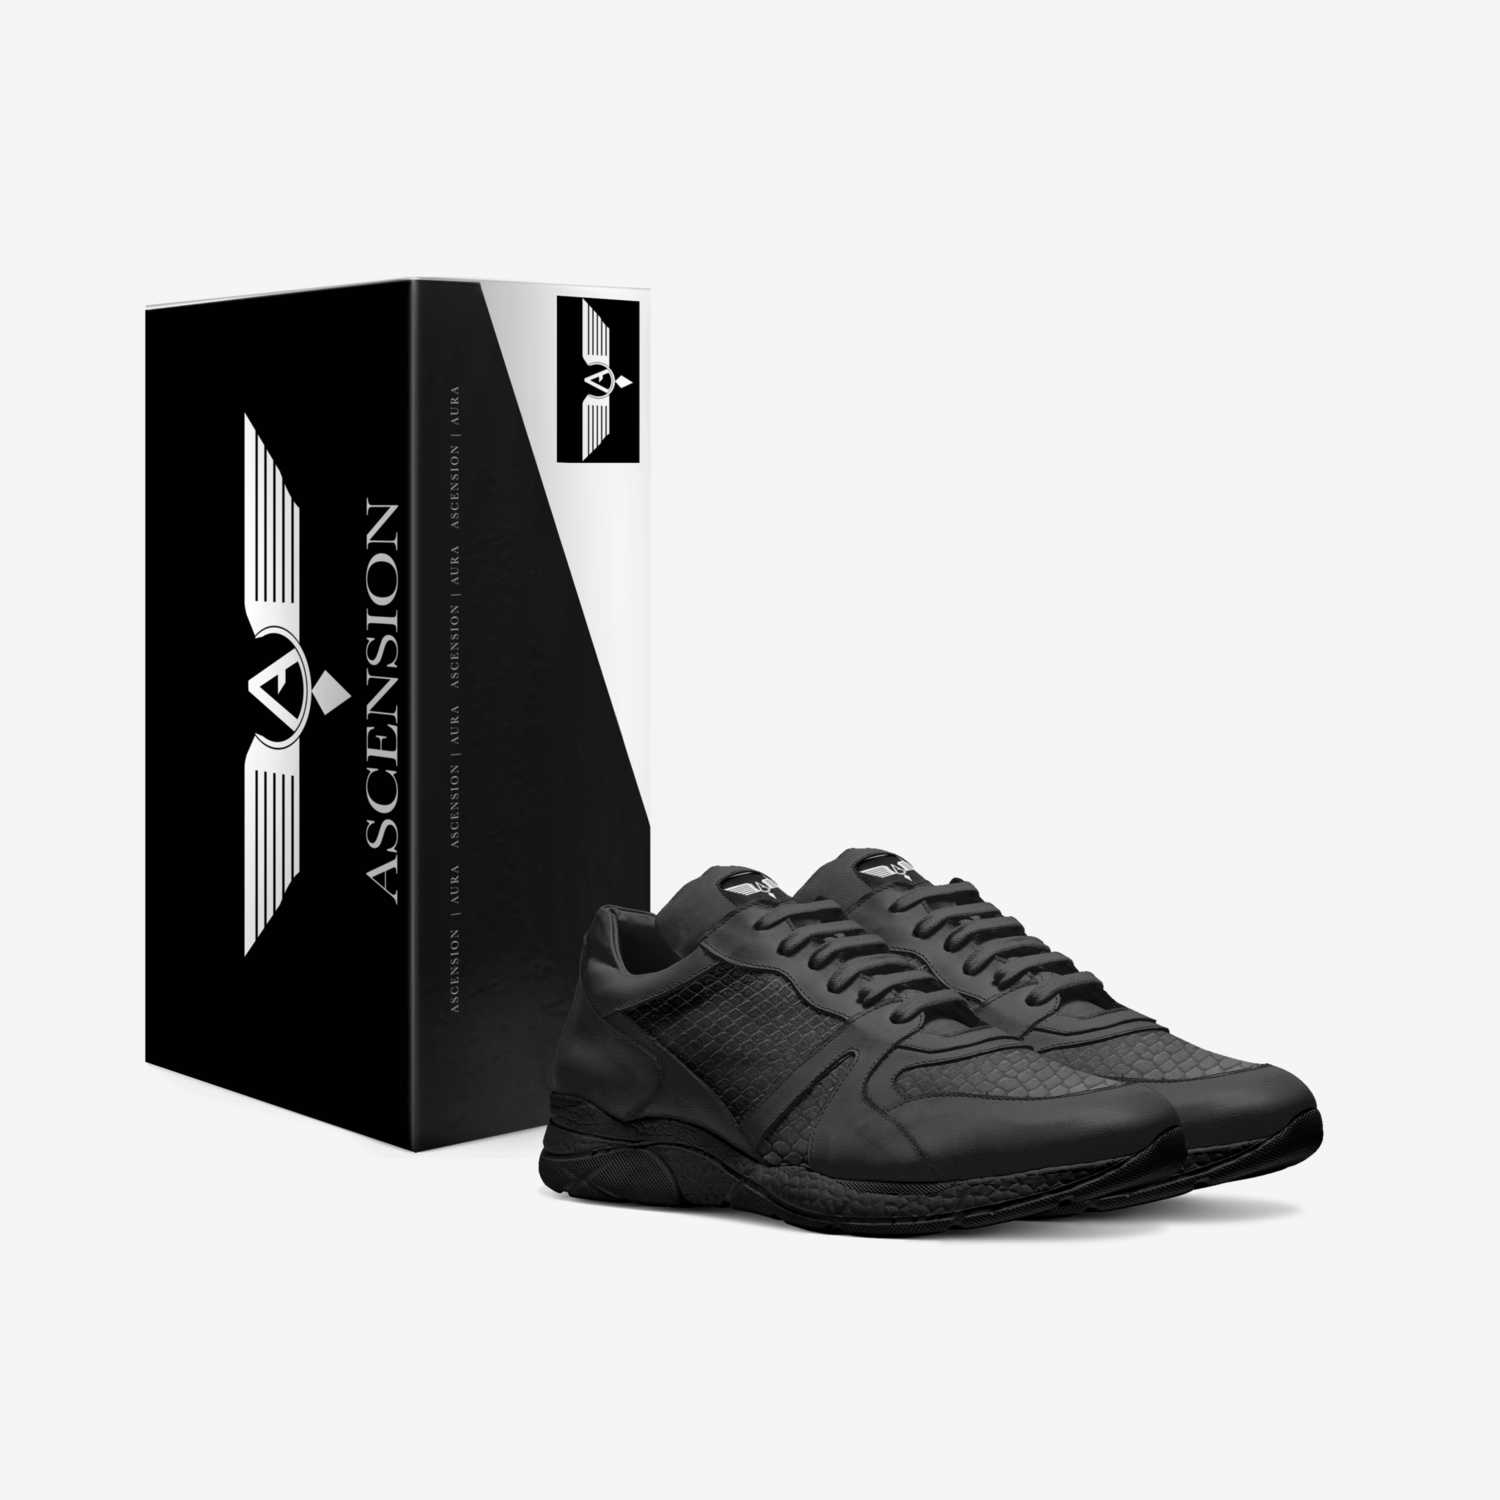 AURA custom made in Italy shoes by Benjamin Parks | Box view